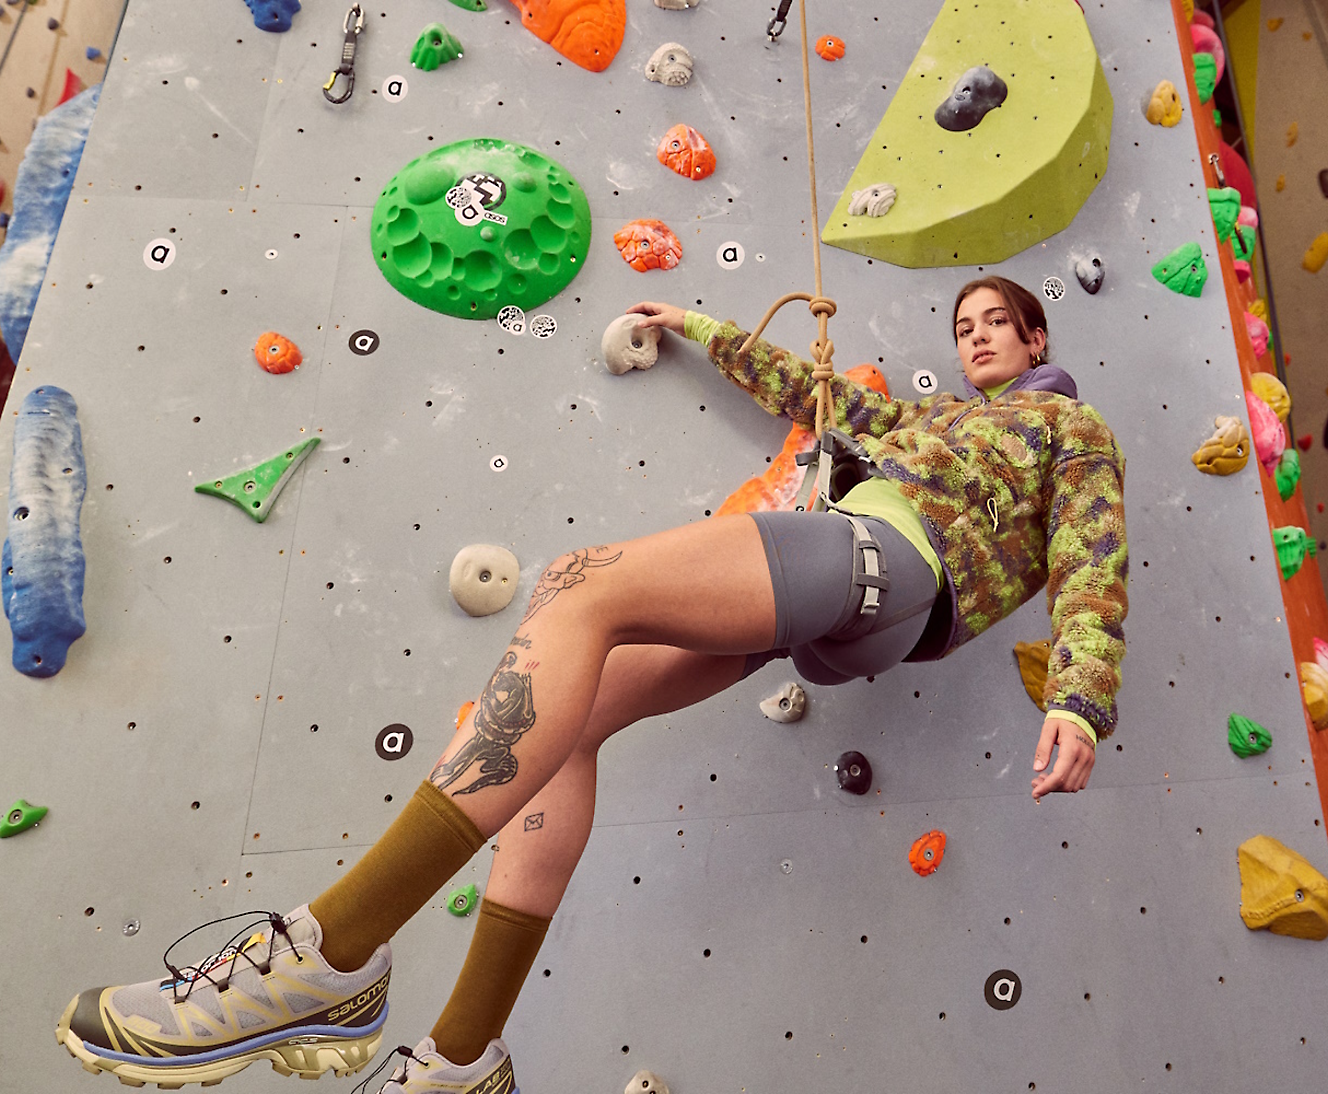 A person wearing climbing gear ascends an indoor rock climbing wall with various colored holds and grips.